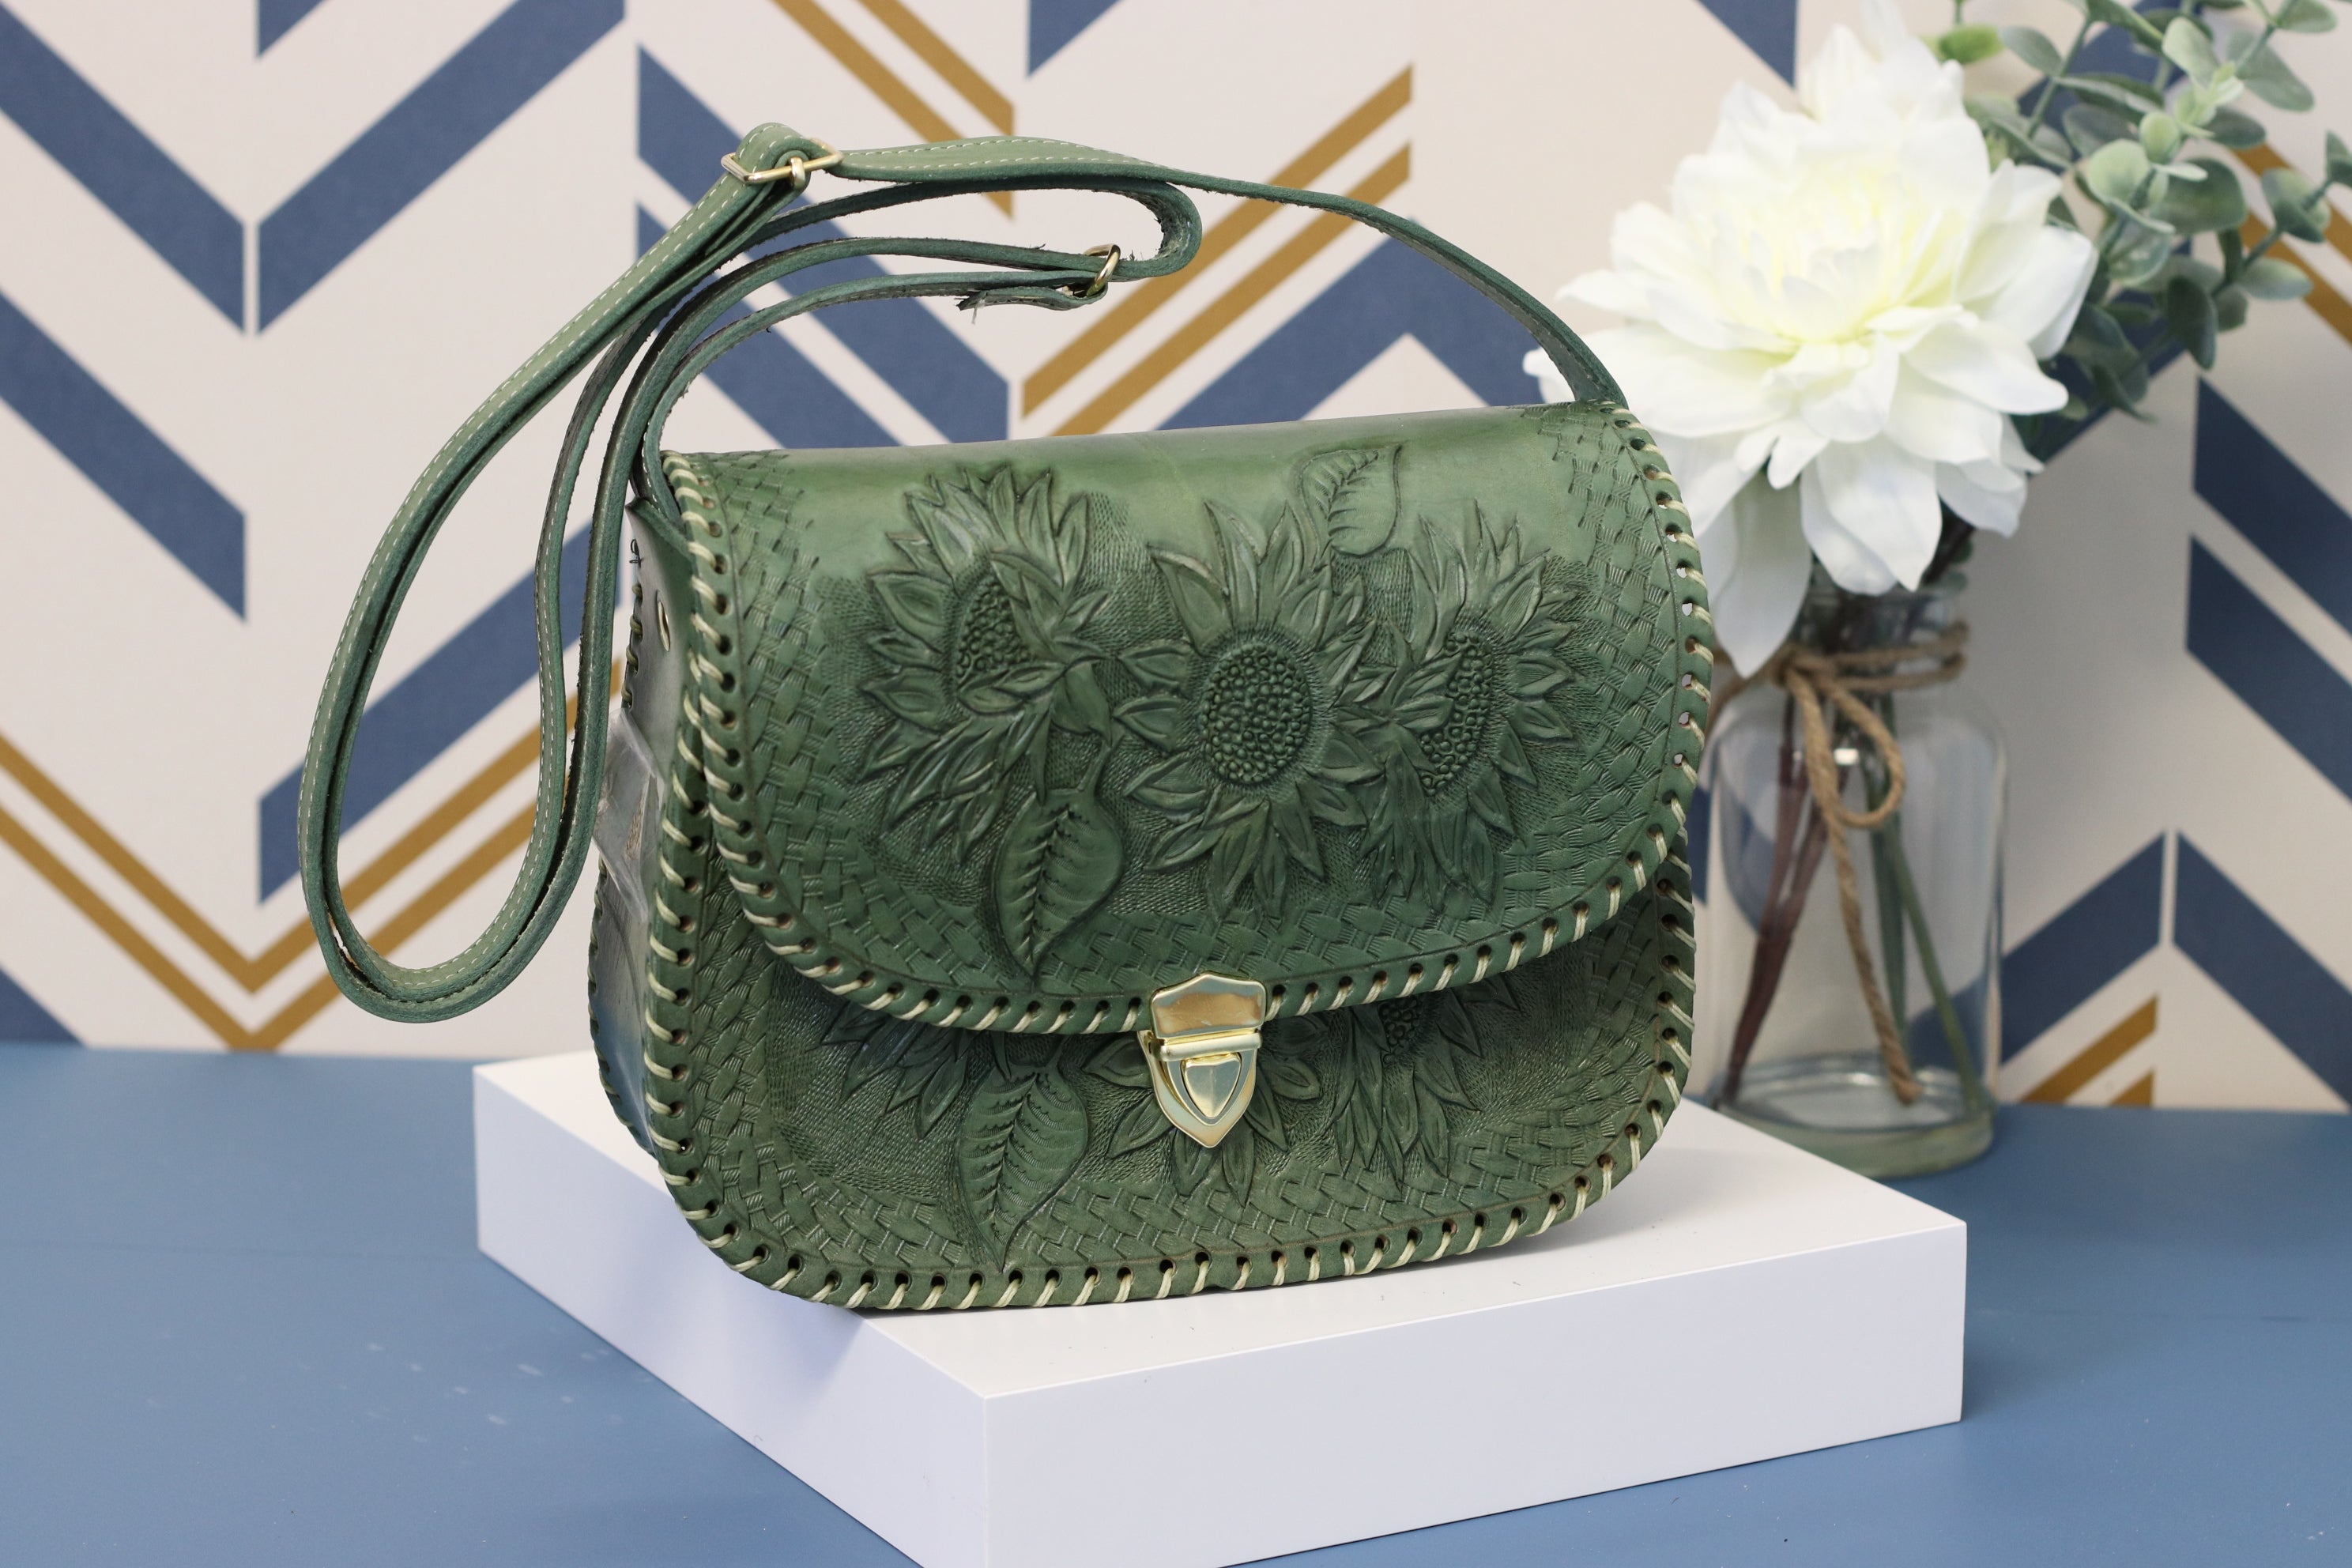 Green Detachable Strap, Adjustable Strap, hand-tooled leather with gold clasp closure. Clutch Handbag. Made by artisans in Central Mexico, shipping from the USA. Handmade. Buy now at www.felipeandgrace.com.